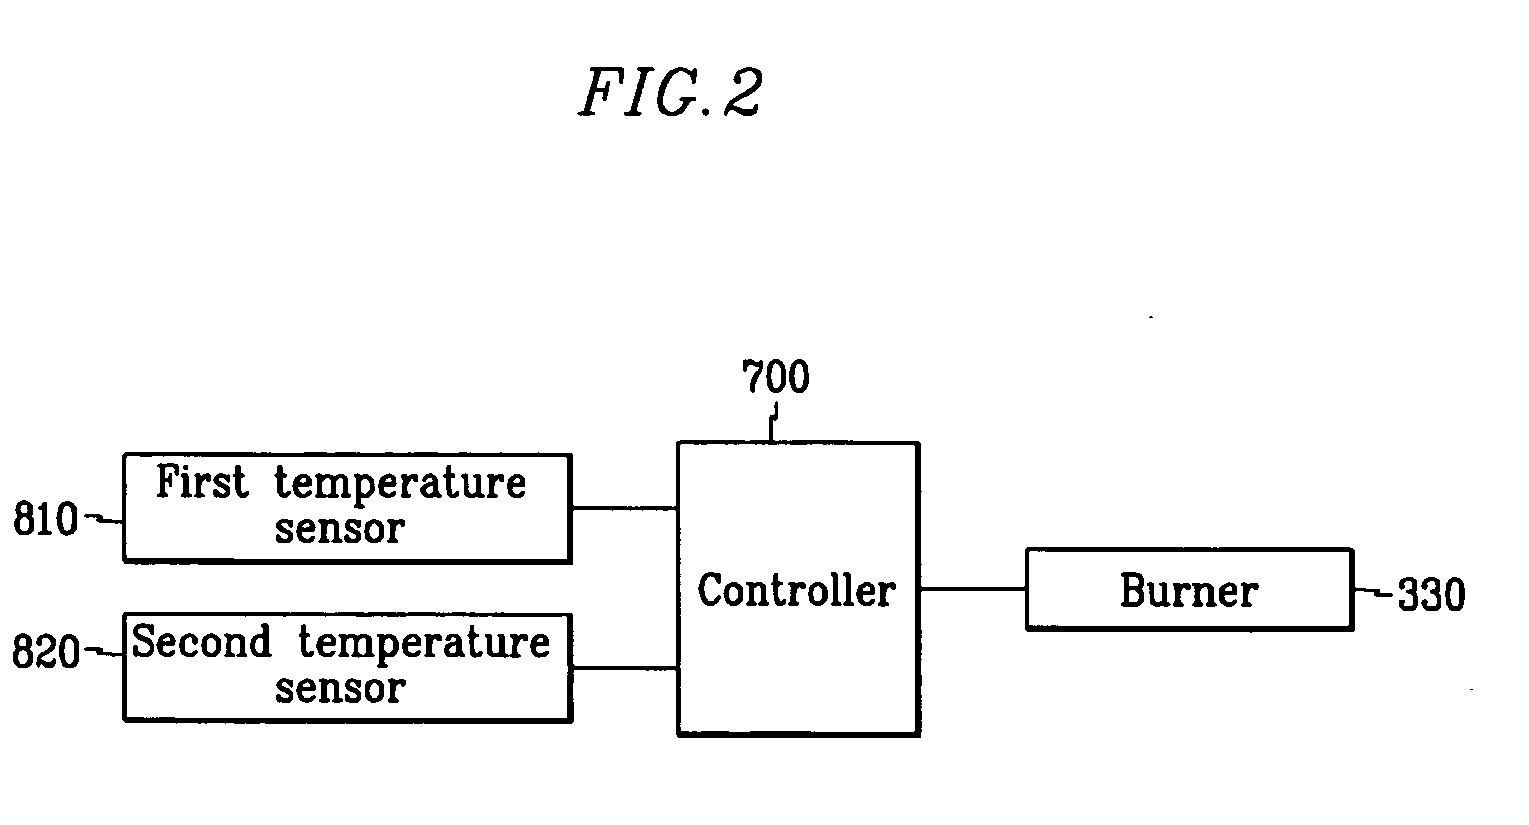 System and method for regenerating a diesel particulate filter